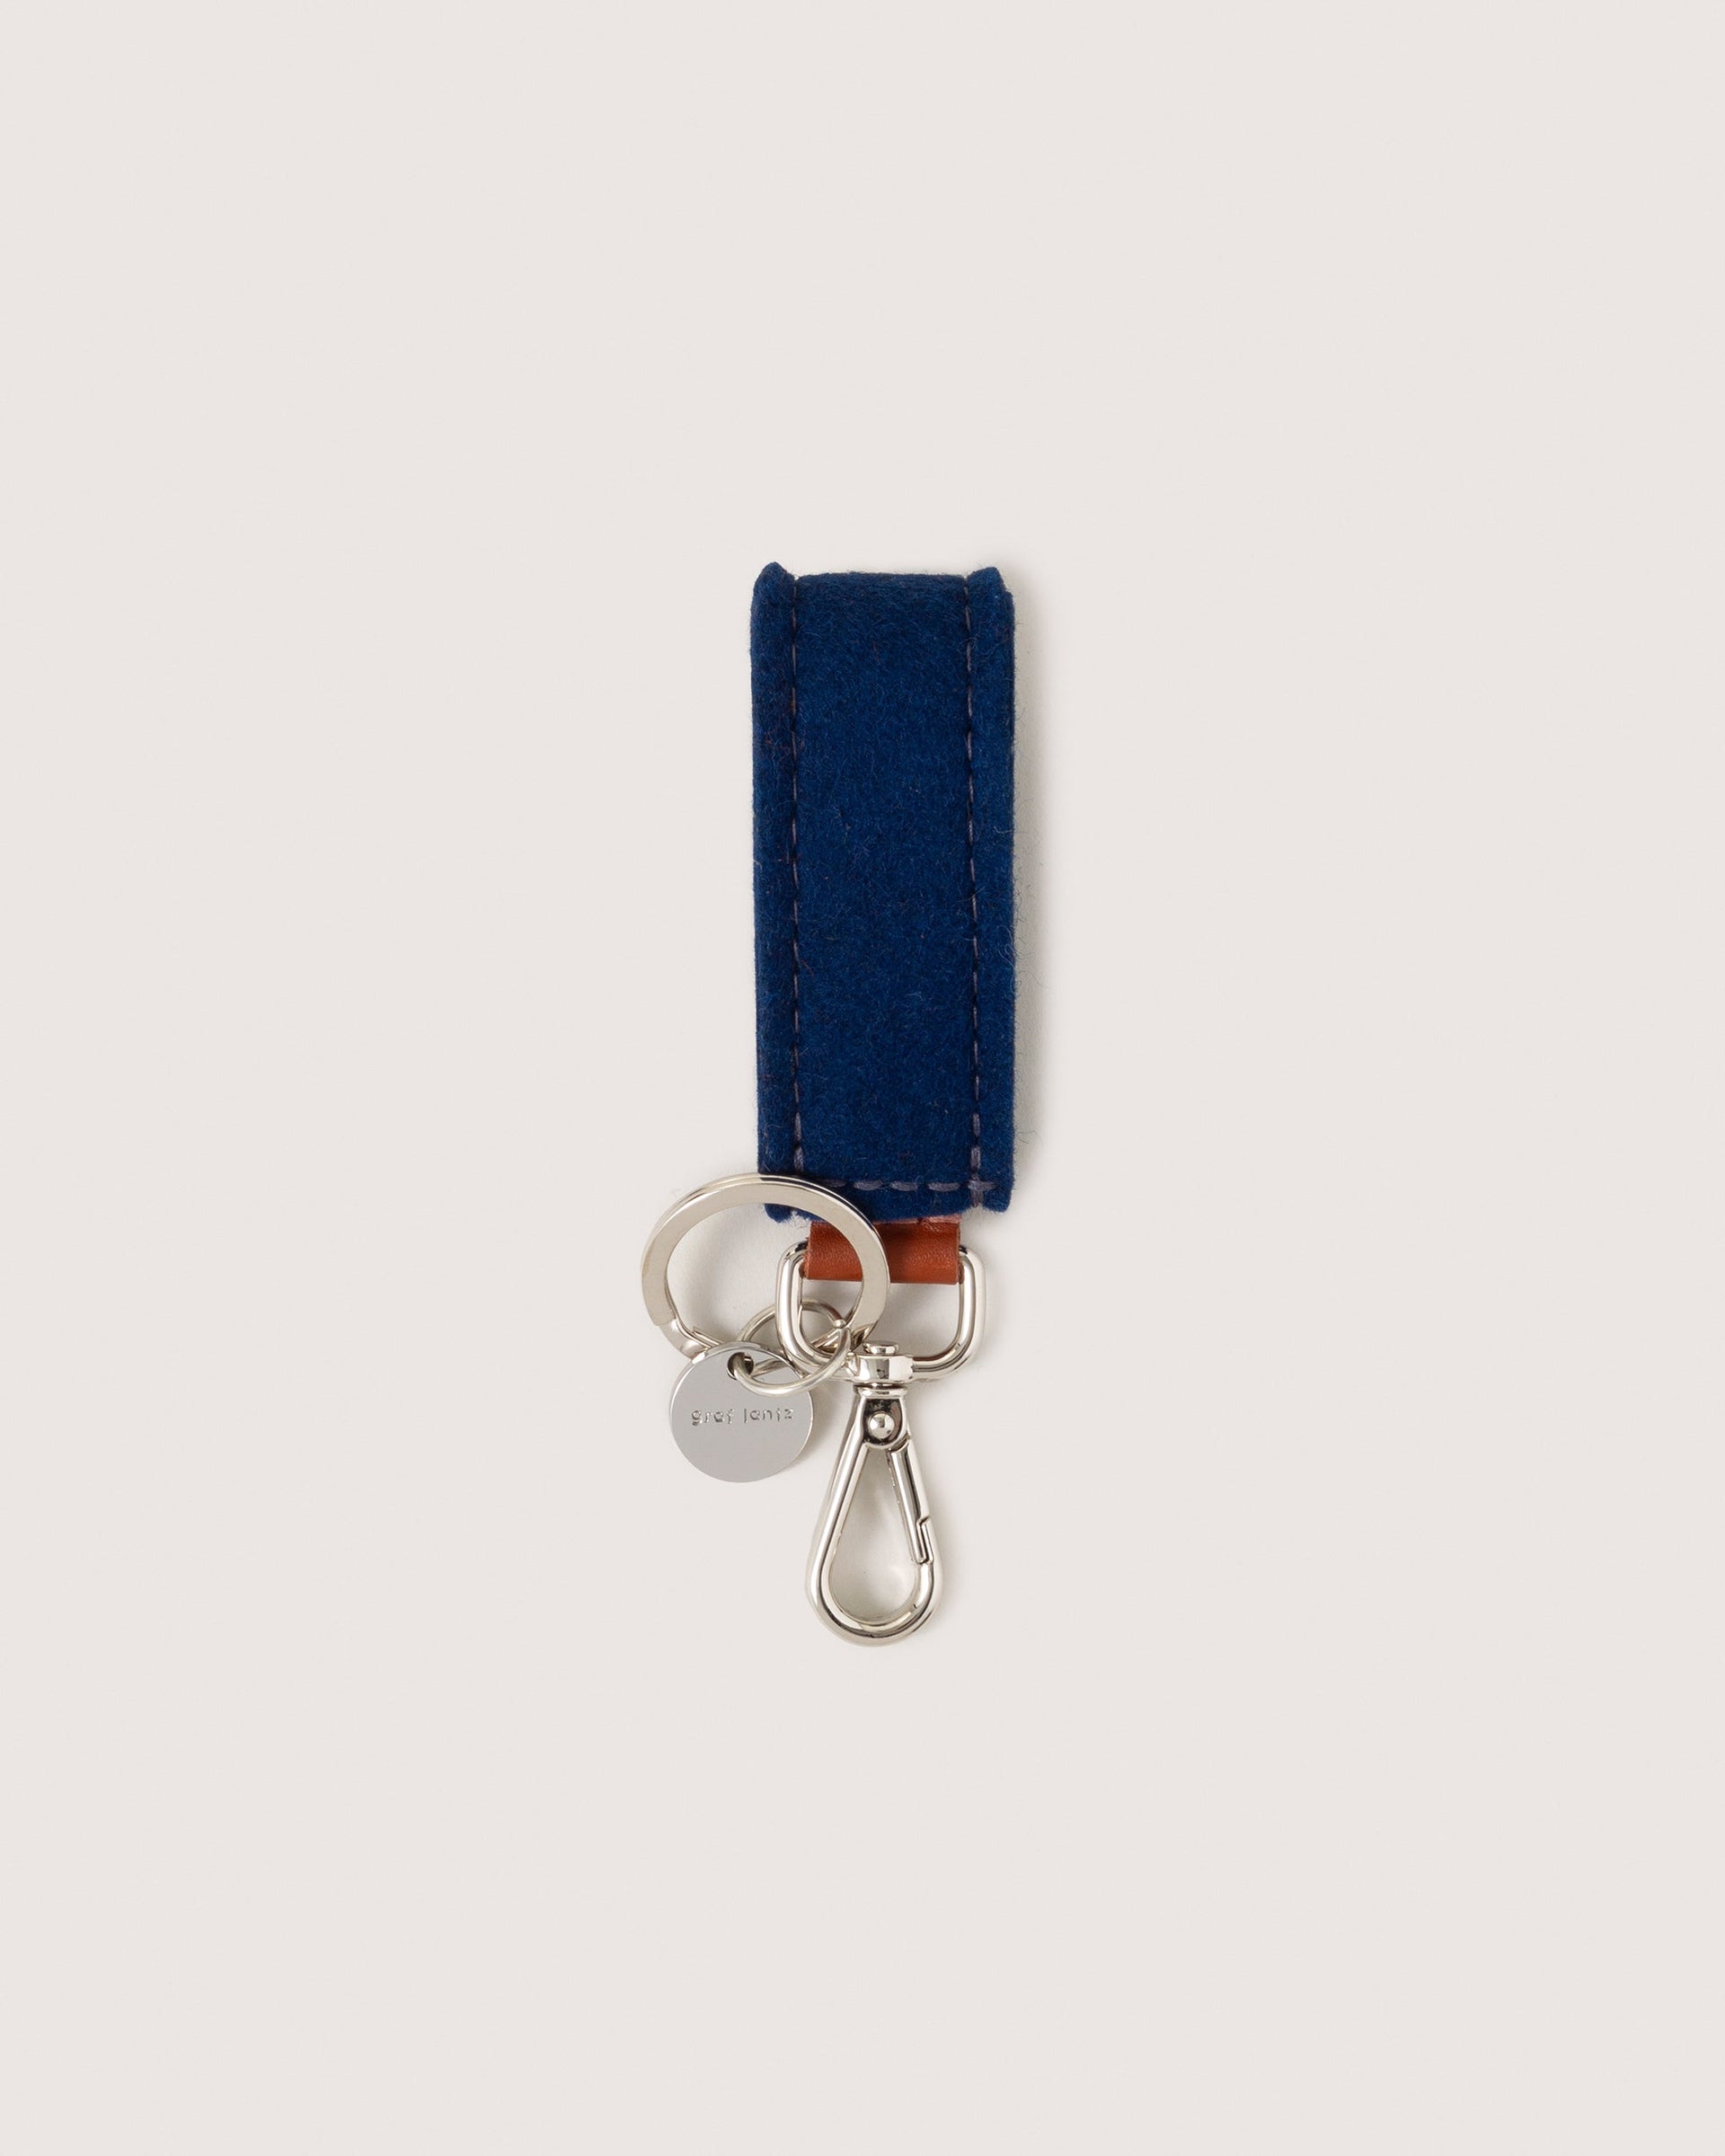 Marine Merino Wool Loop Key Fob with silver colored Lobster Clasp, Flat Wide Keyring, and Logo Tog Tag, white background.